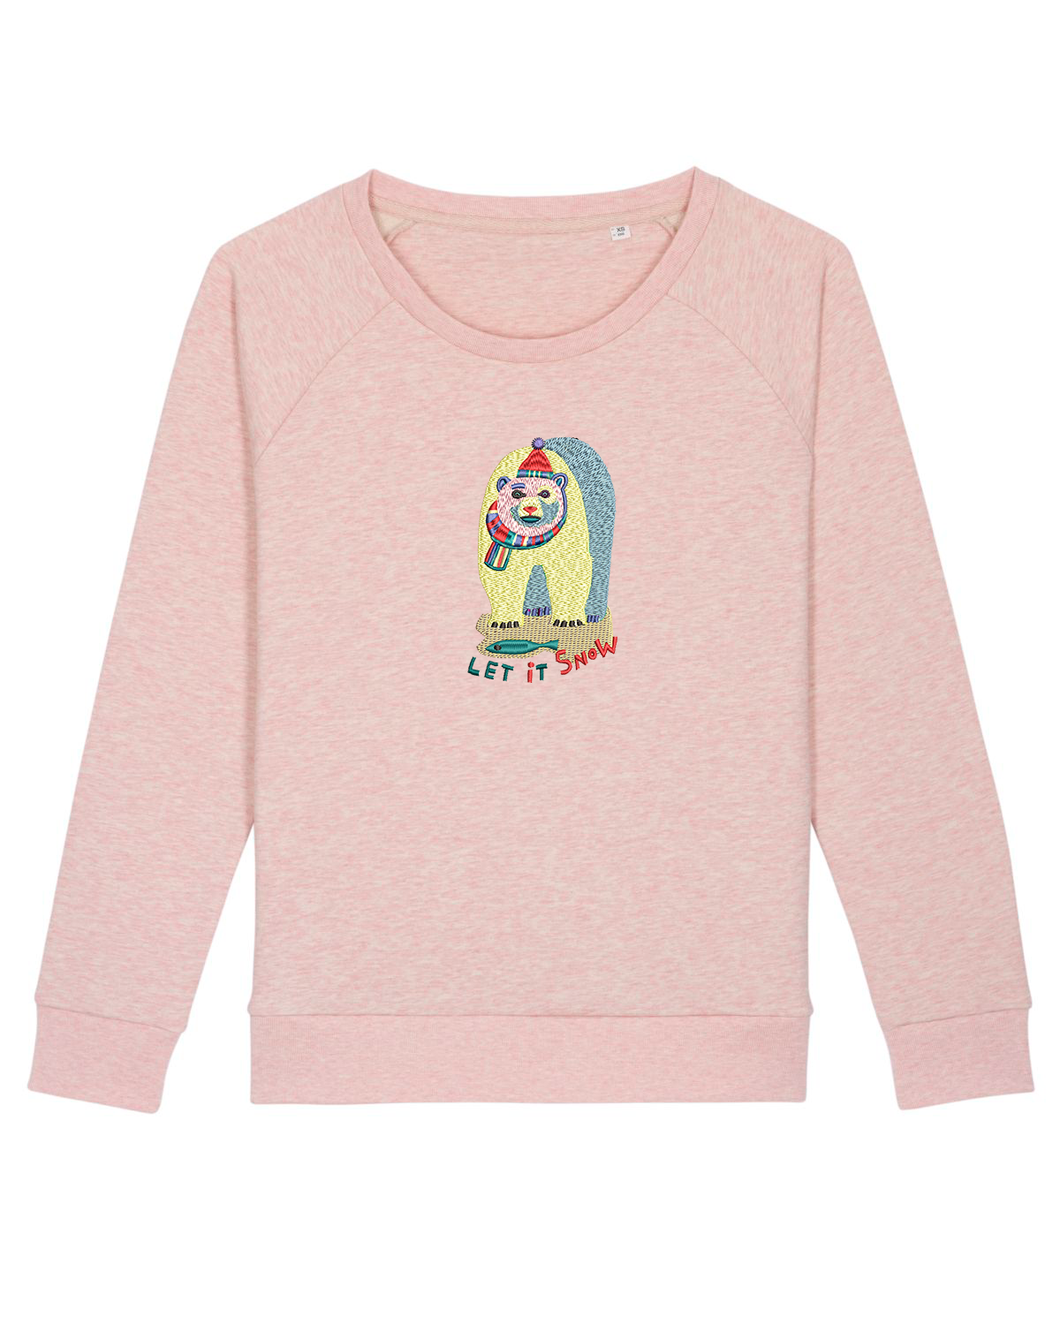 Let it SNOW 🐻‍❄️- Embroidered WOMEN'S RELAXED FIT SWEATSHIRT